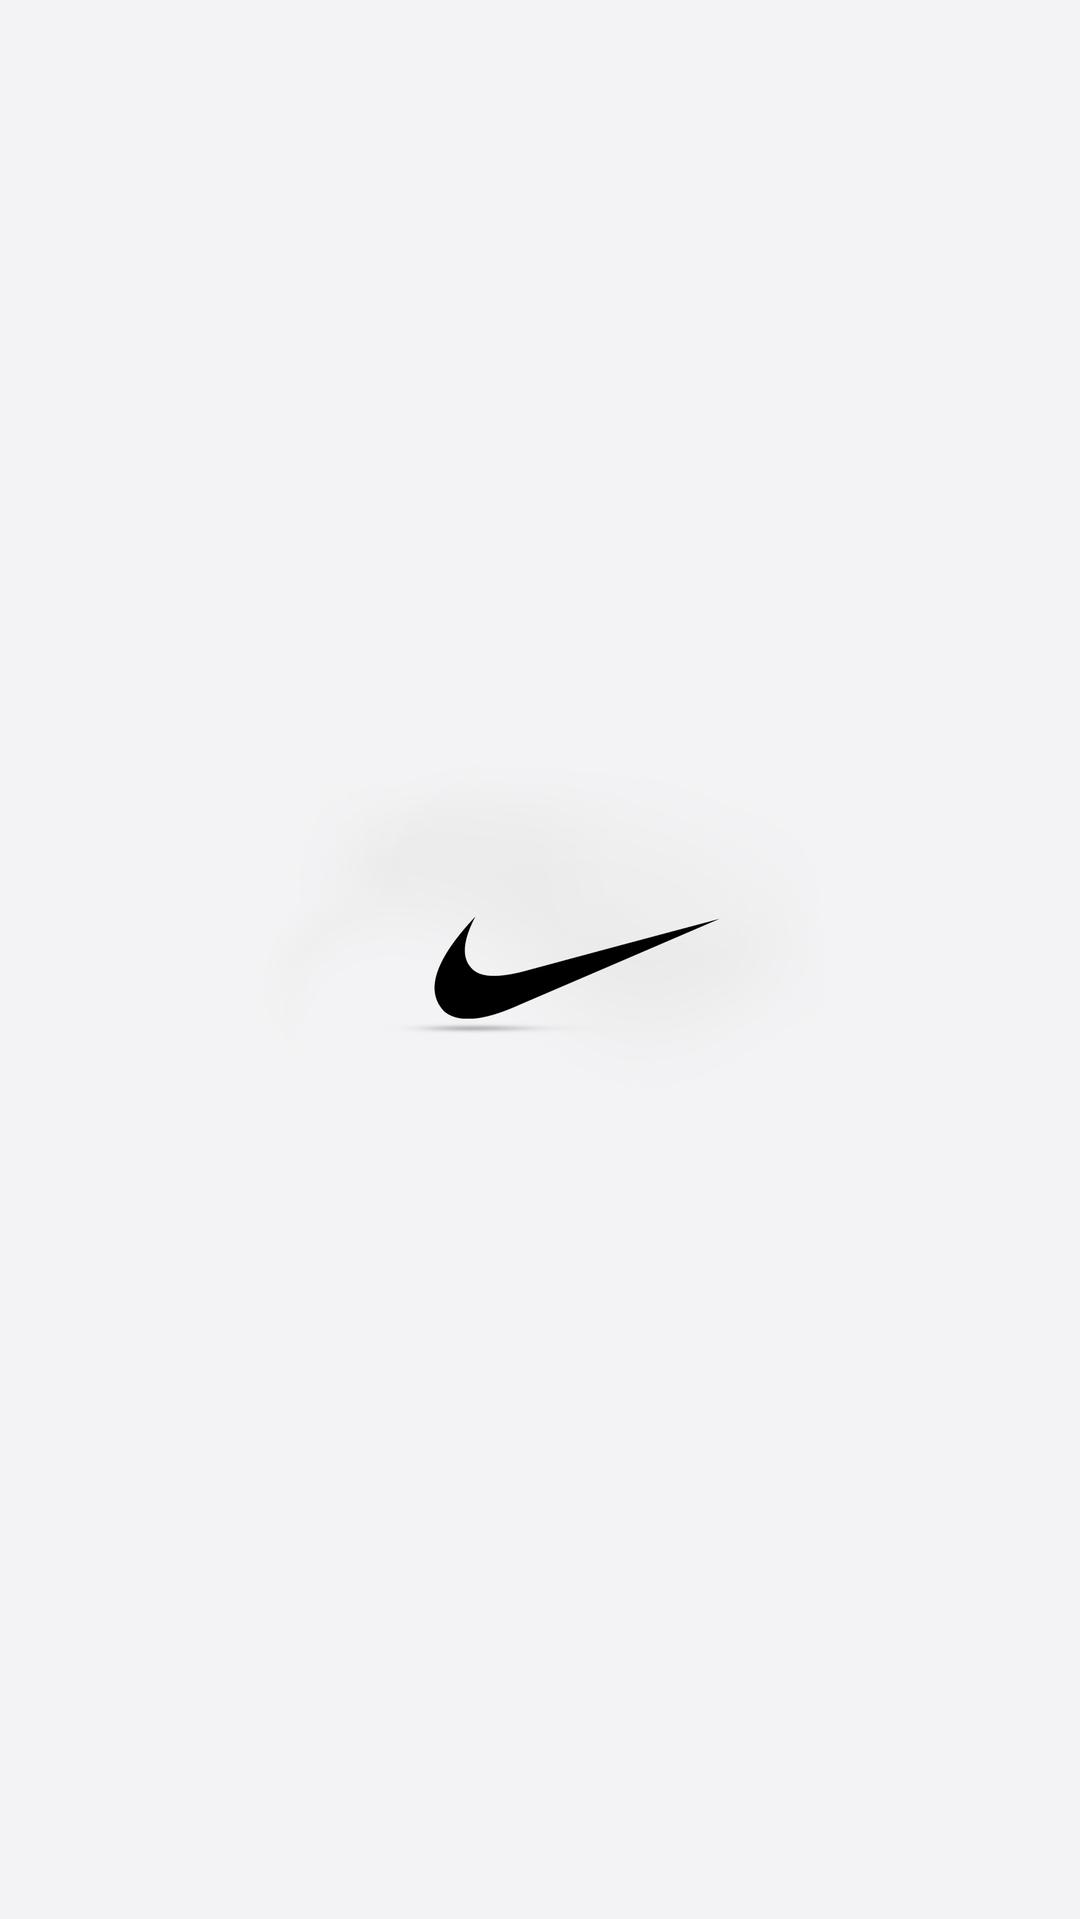 Wallpaper Nike Photos Of iPhone By